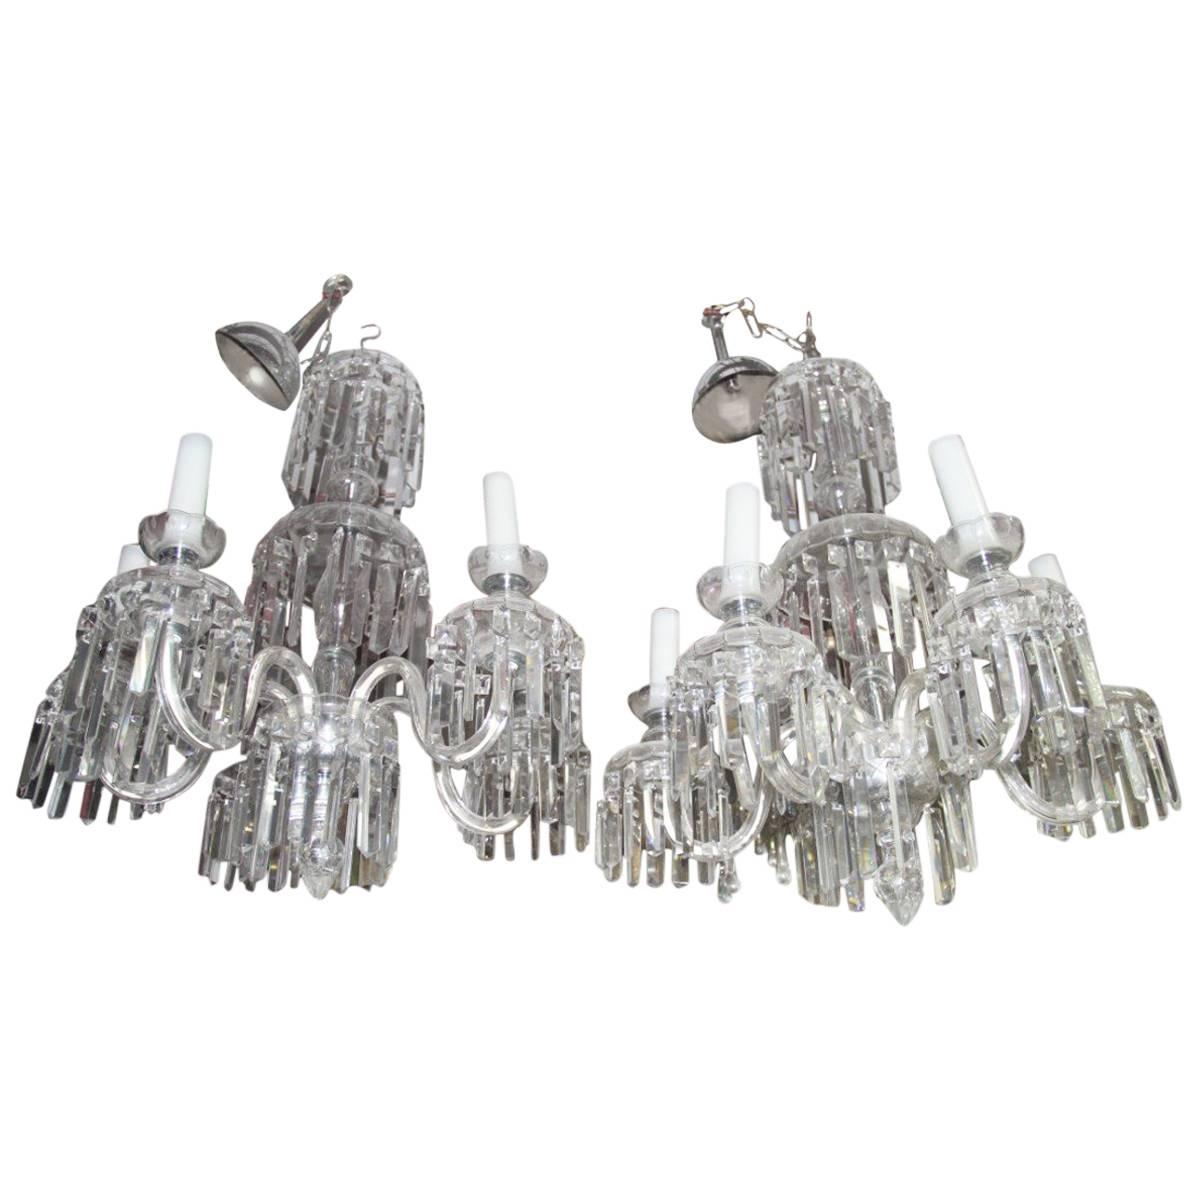 Pair Crystal Chandeliers 1950 Bohemia Elegant and Chic For Sale